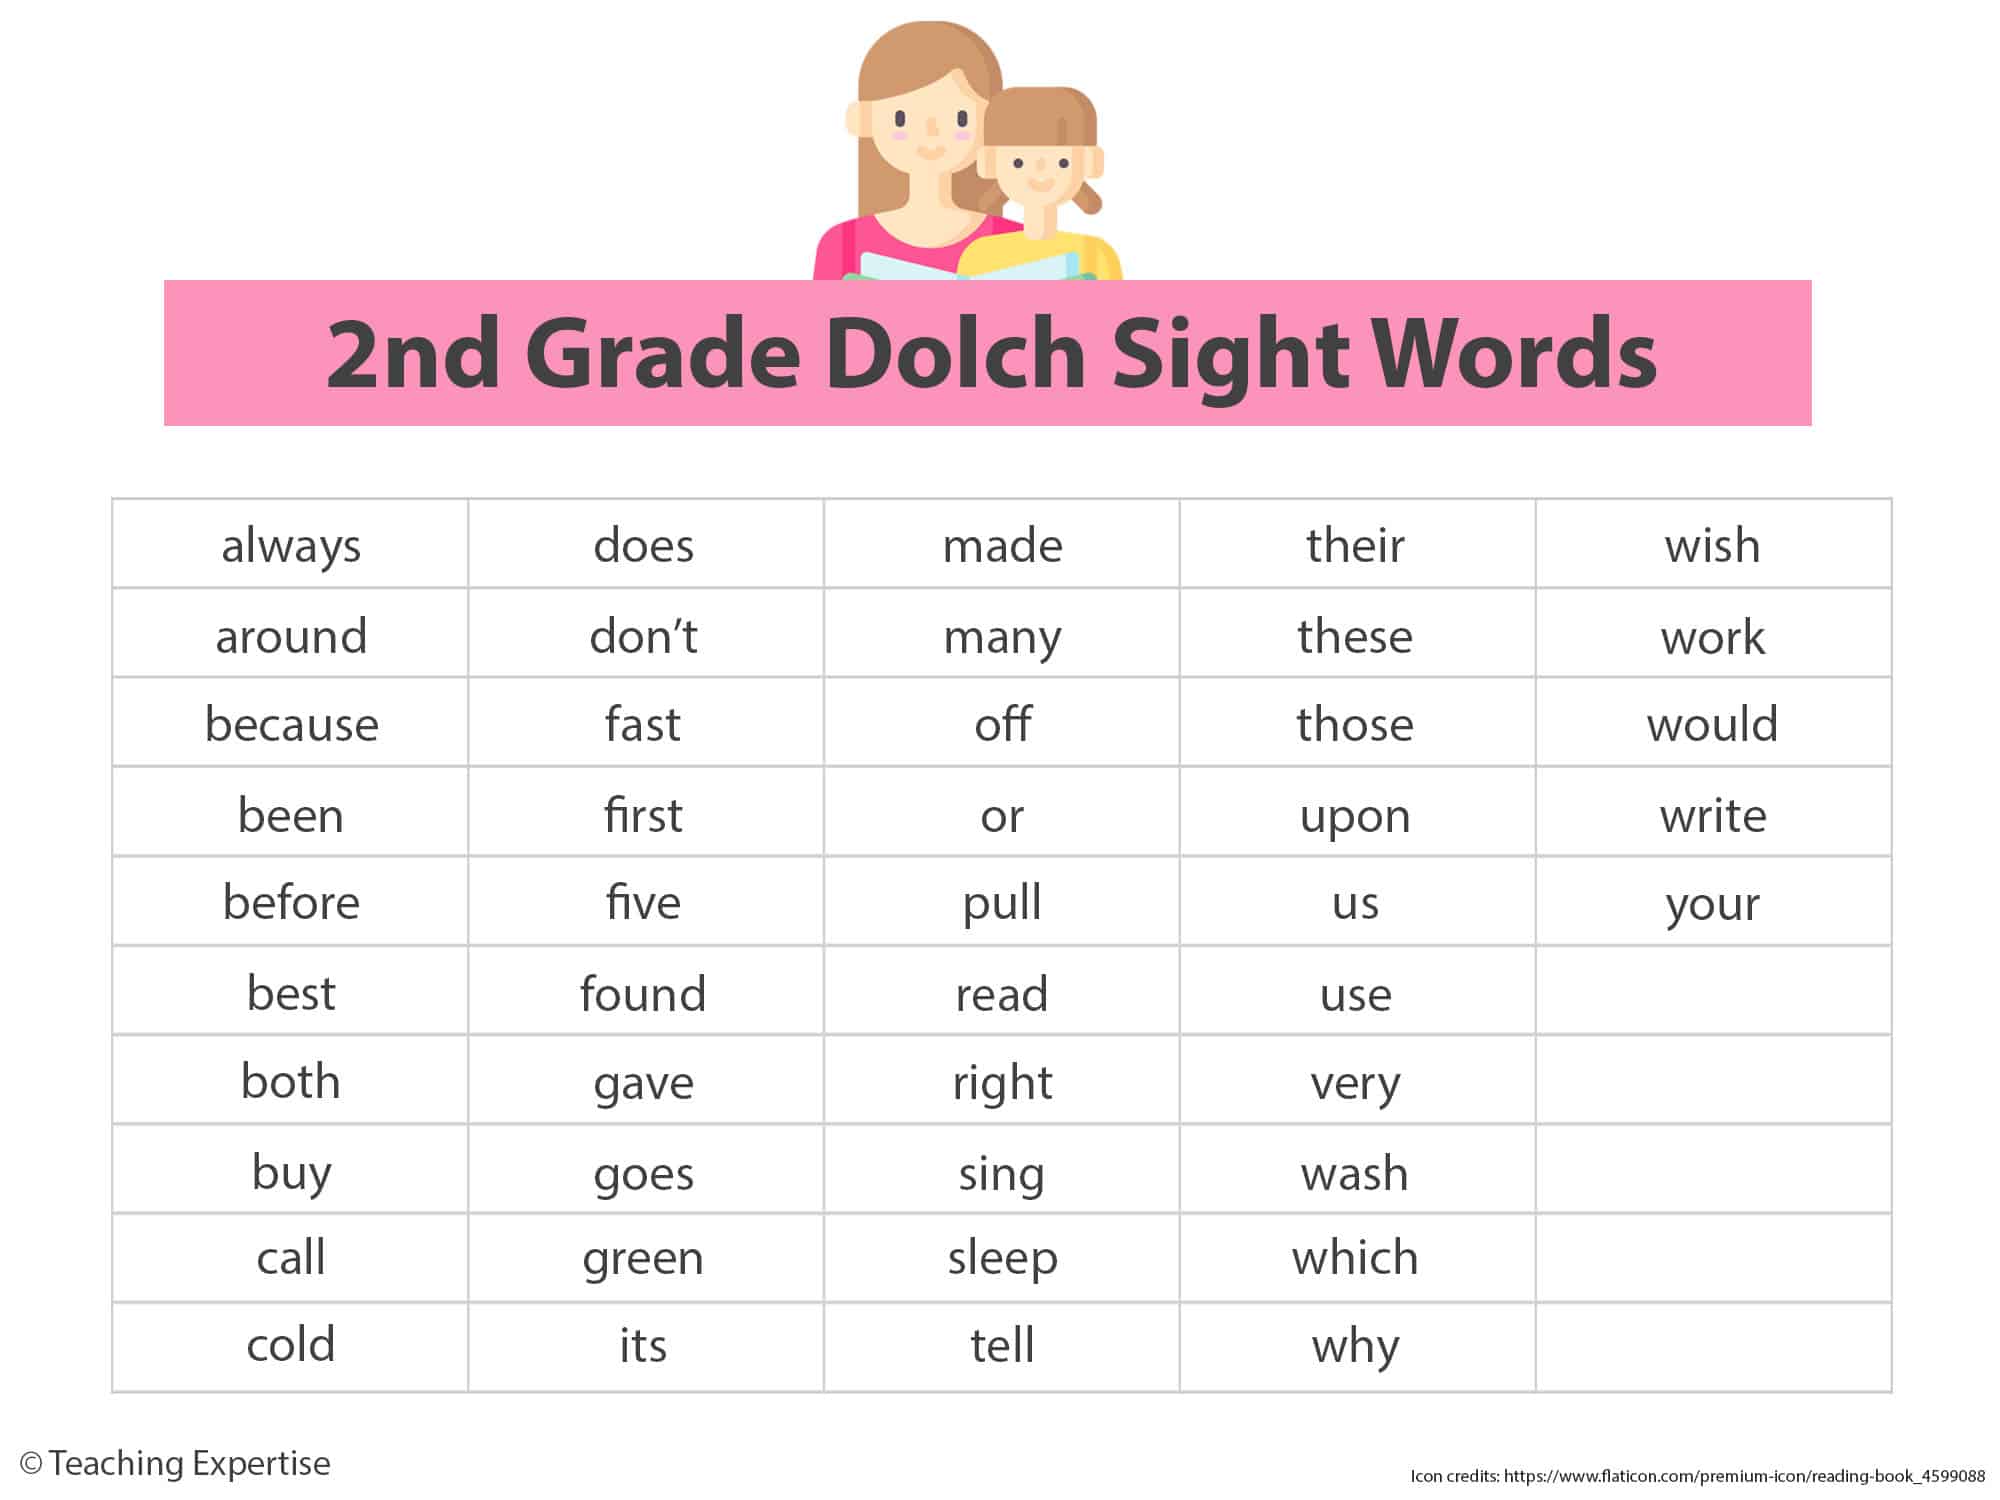 2nd grade dolch sight words